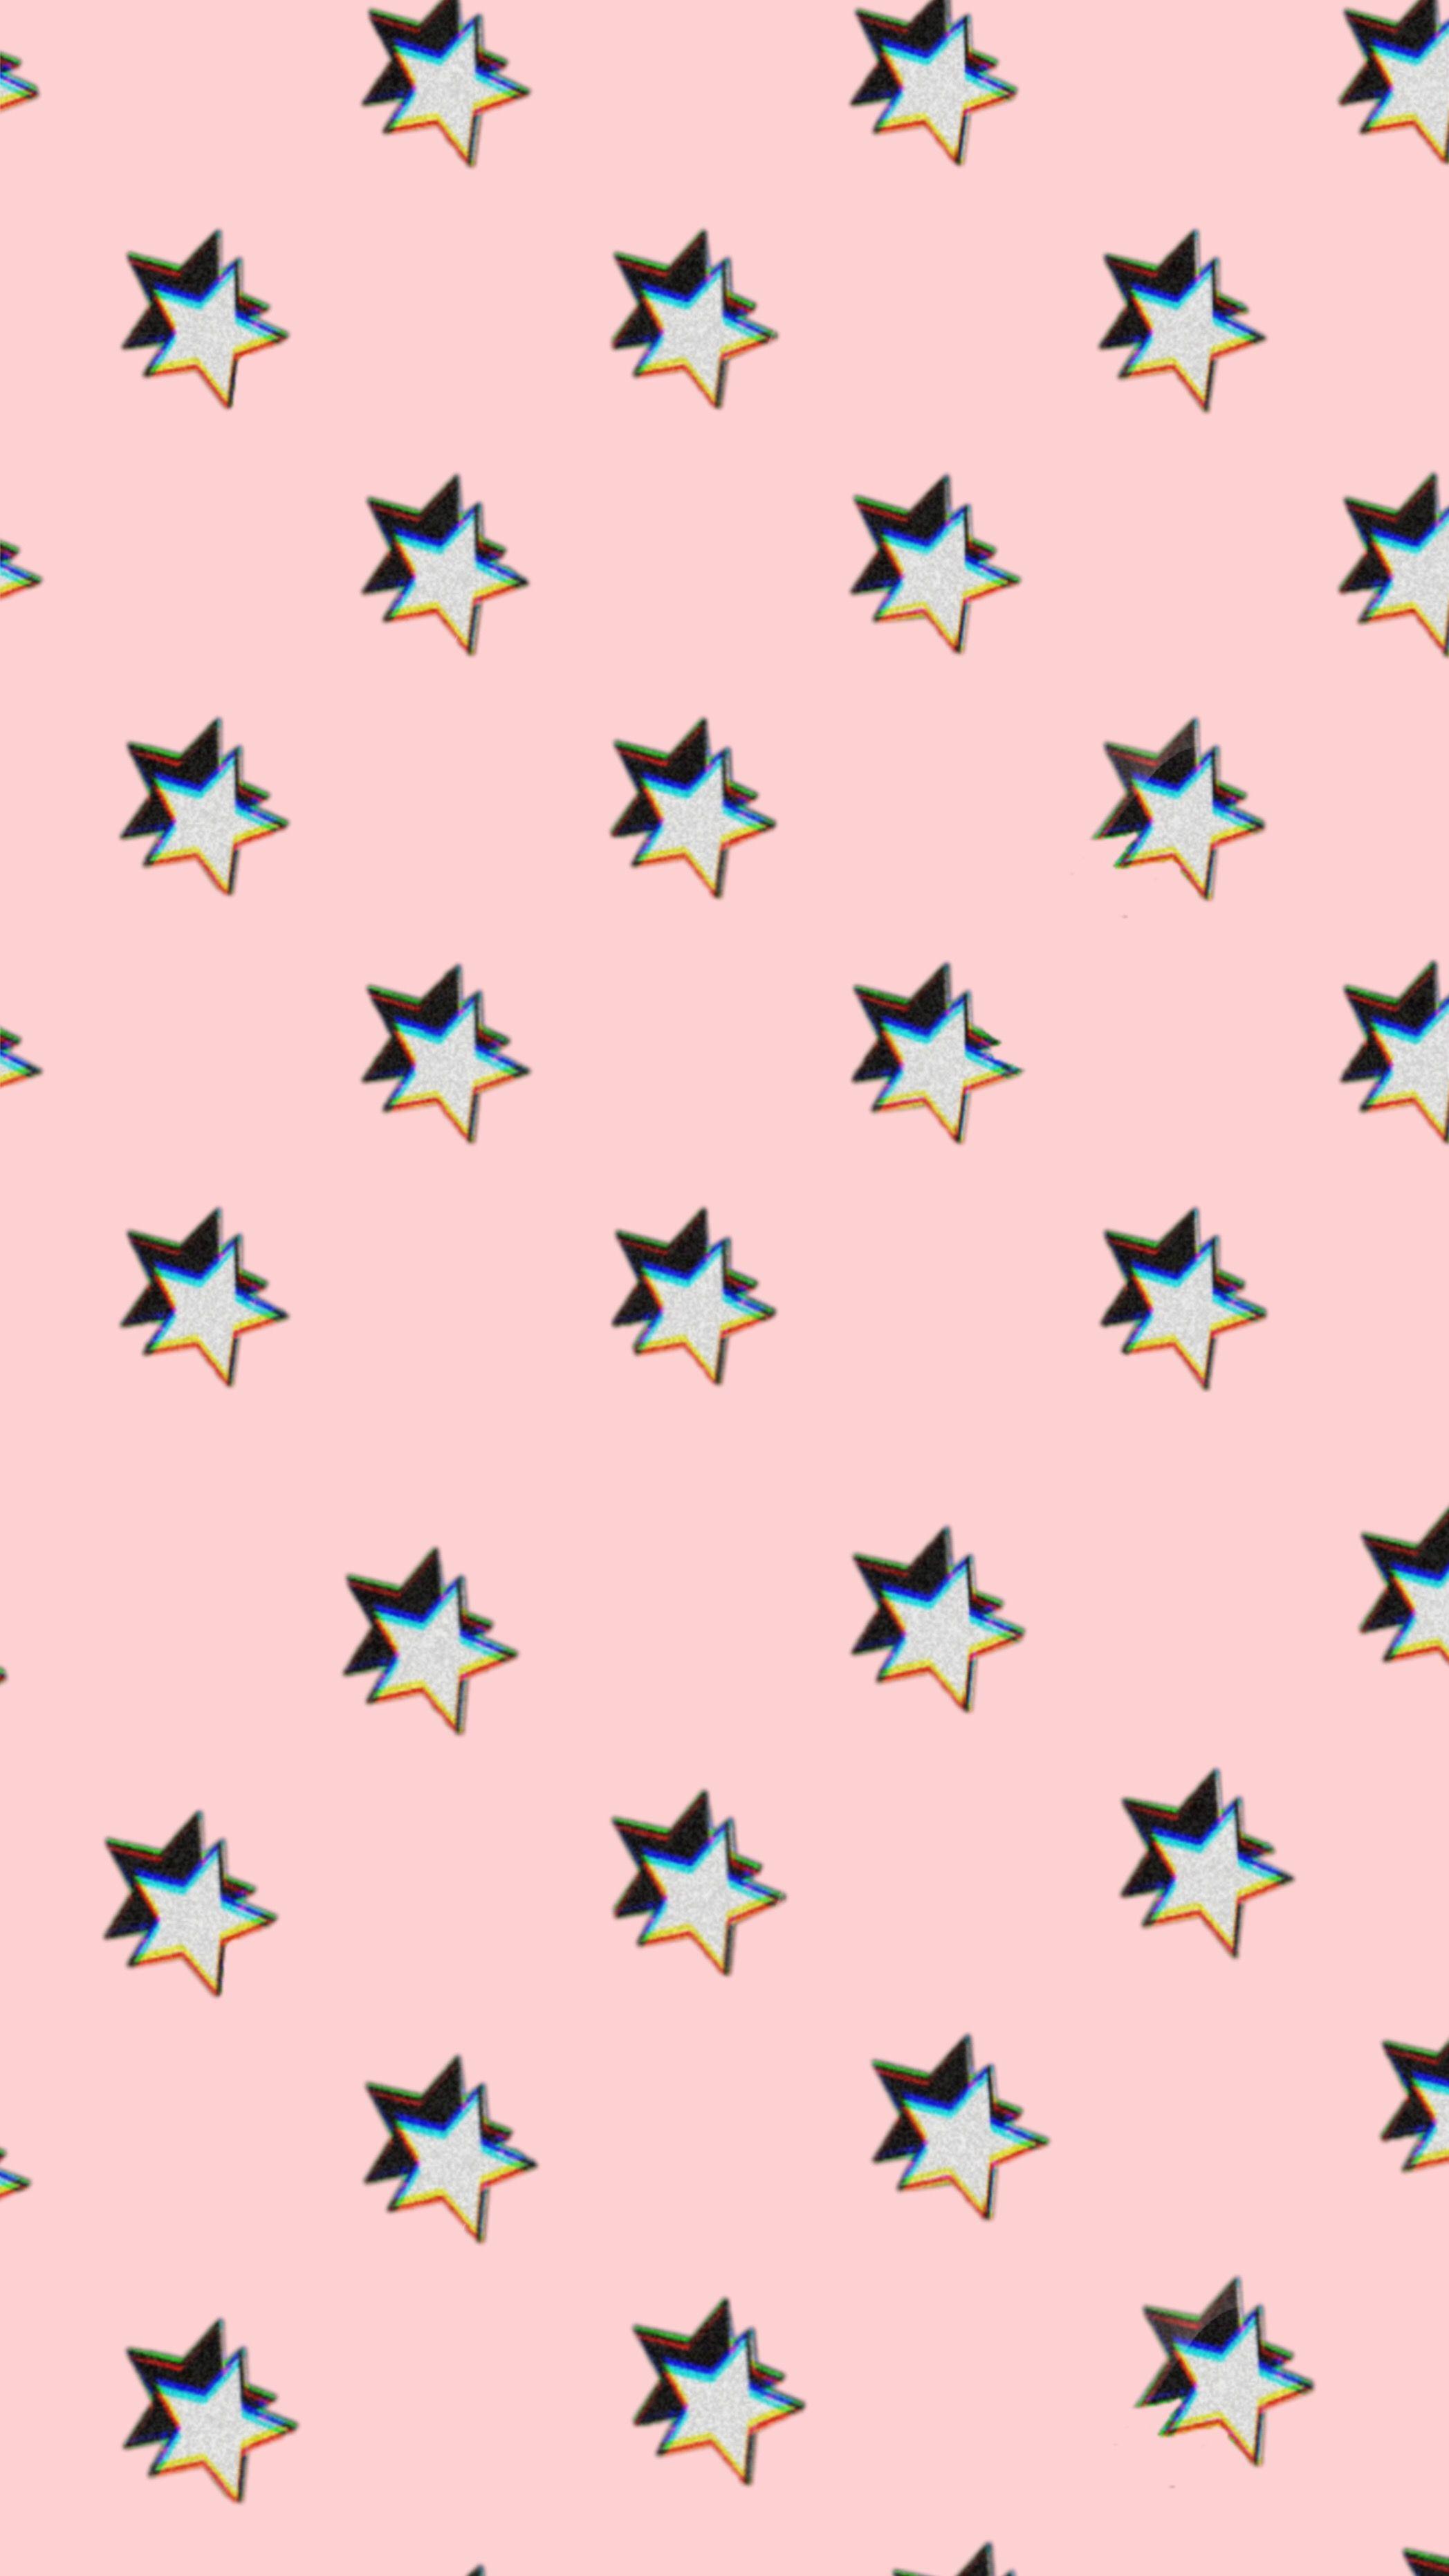 2095 x 3724 · jpeg - Wallpapers with stars in 2020 | Cute patterns wallpaper, Iphone ...